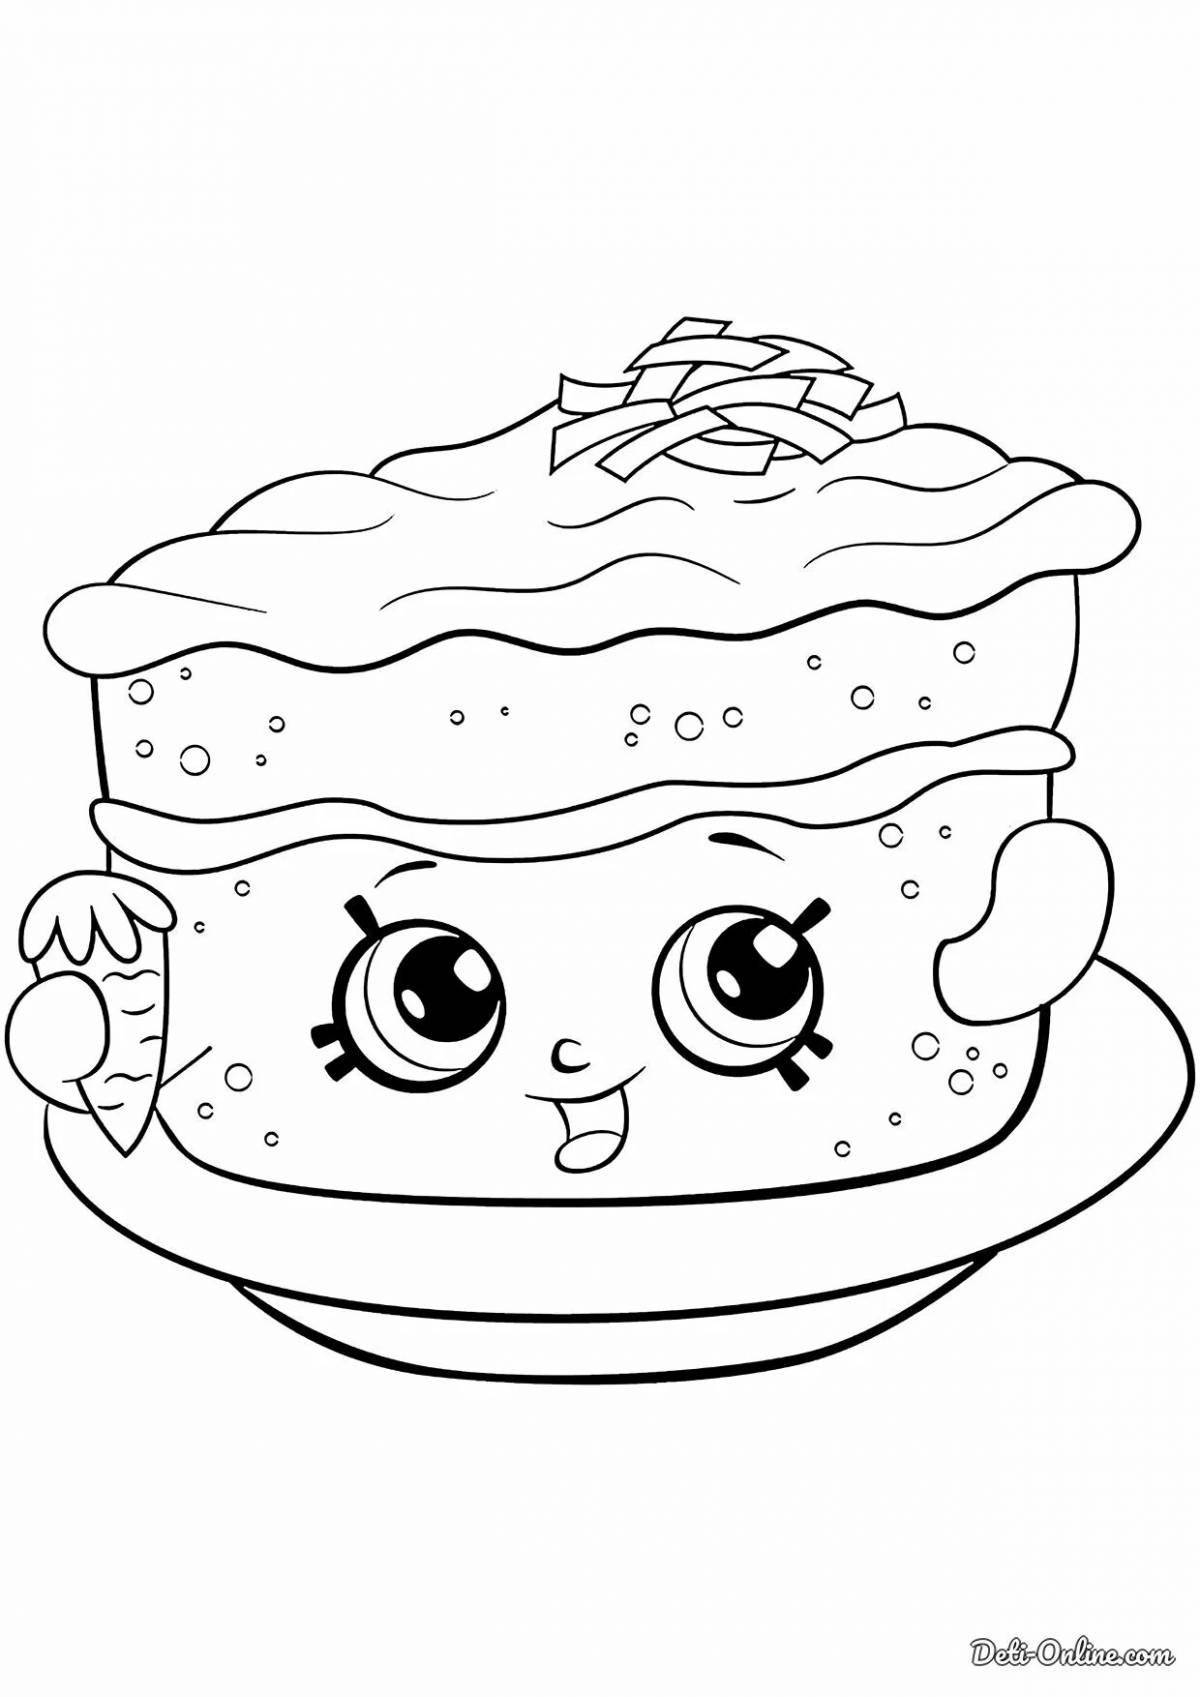 Radiant coloring page cute food with eyes